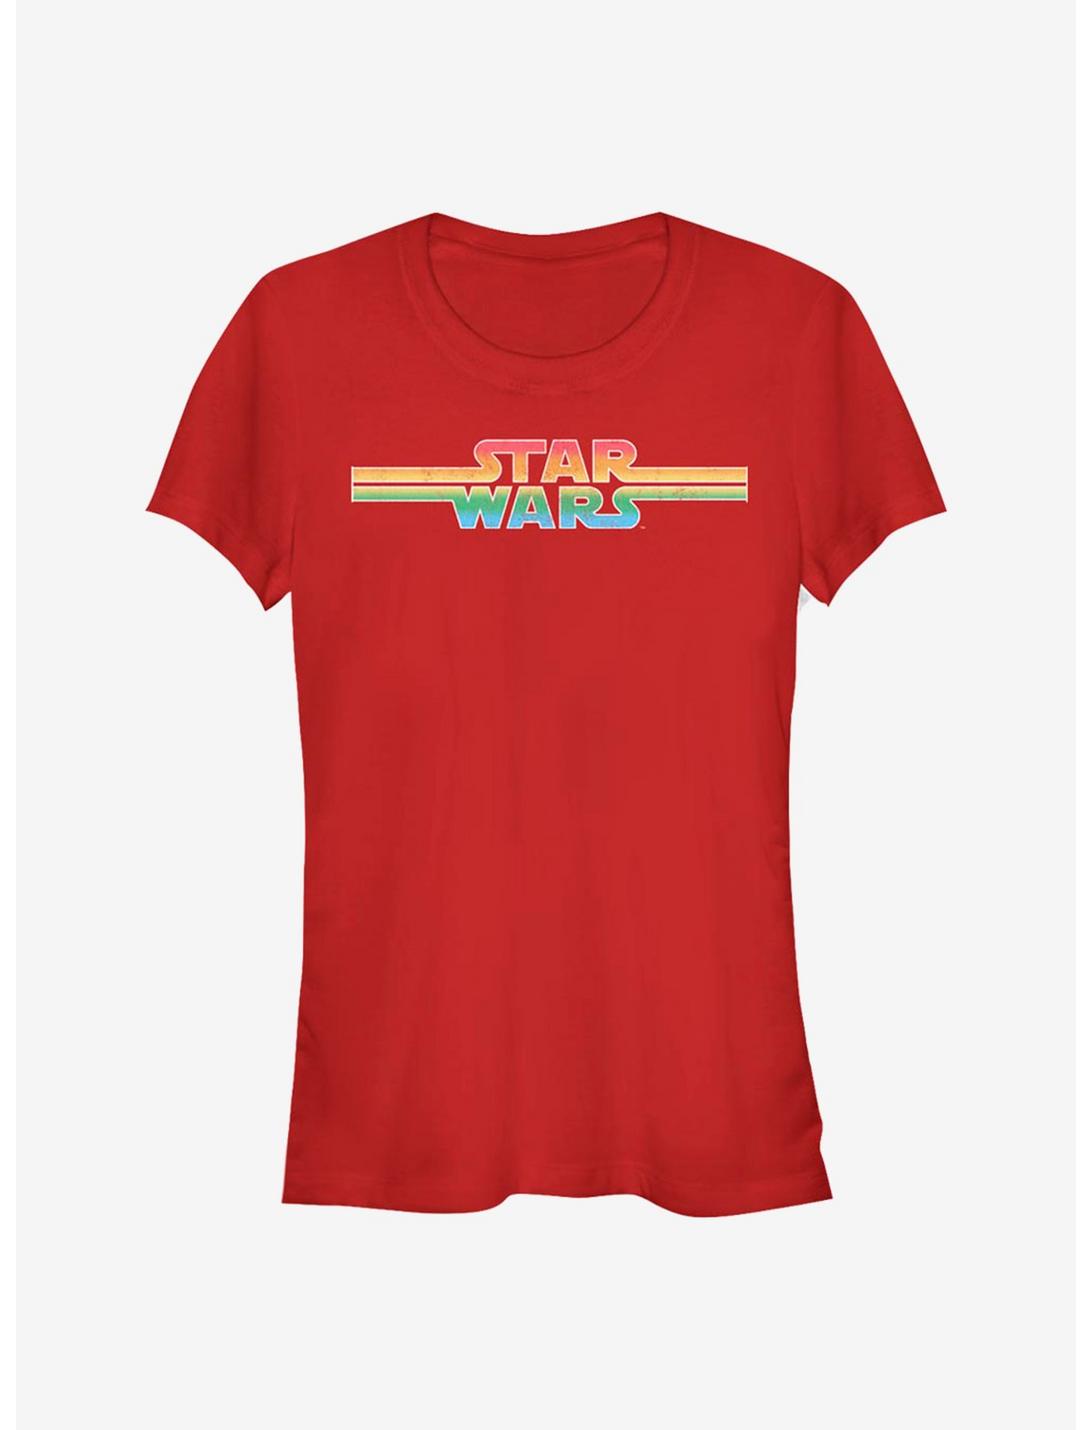 Star Wars Rainbow Outline Girls T-Shirt, RED, hi-res